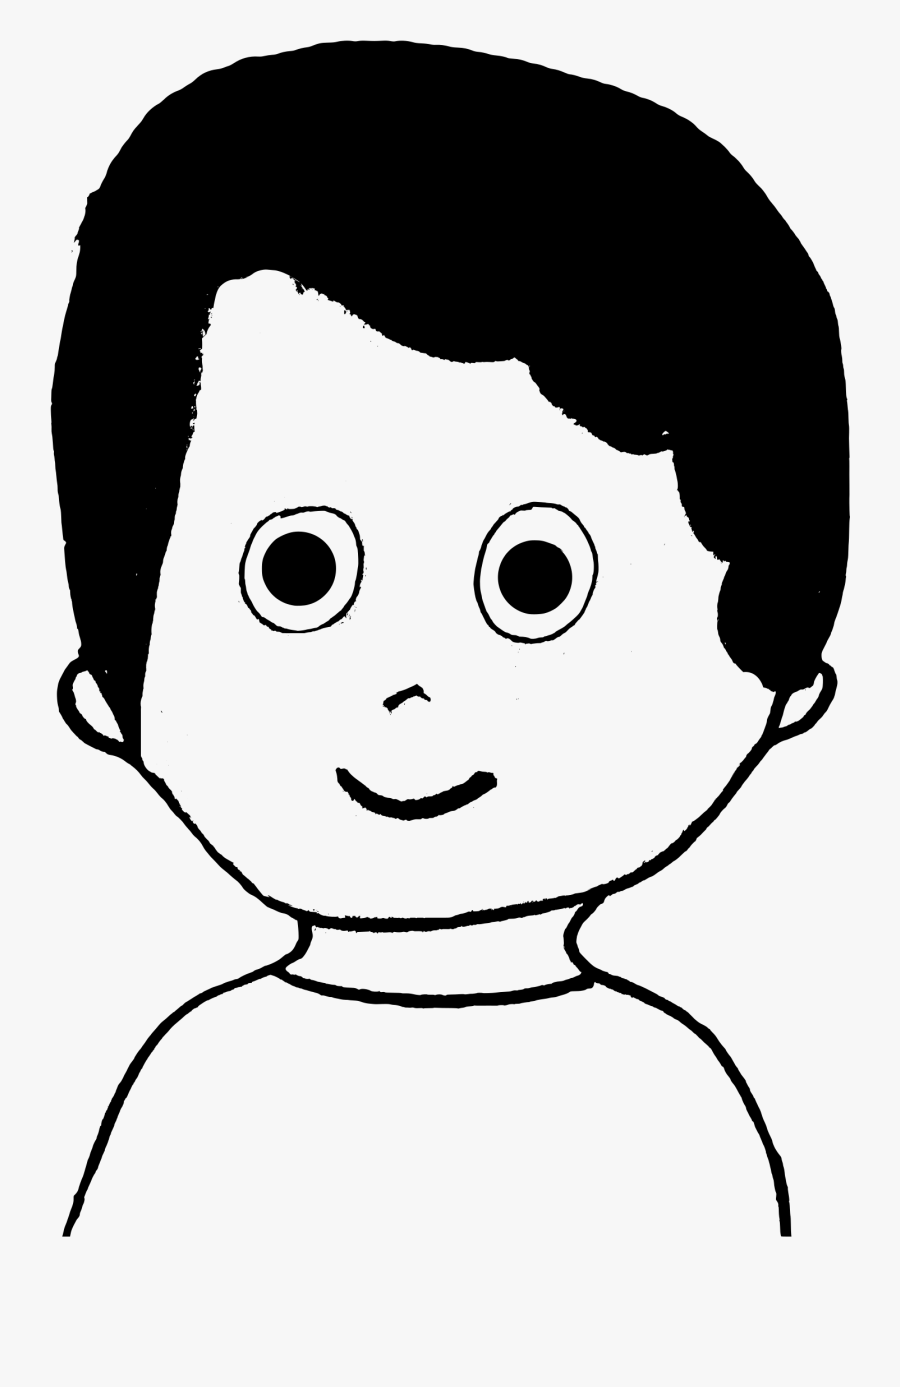 Big And Small Face Black And White, Transparent Clipart